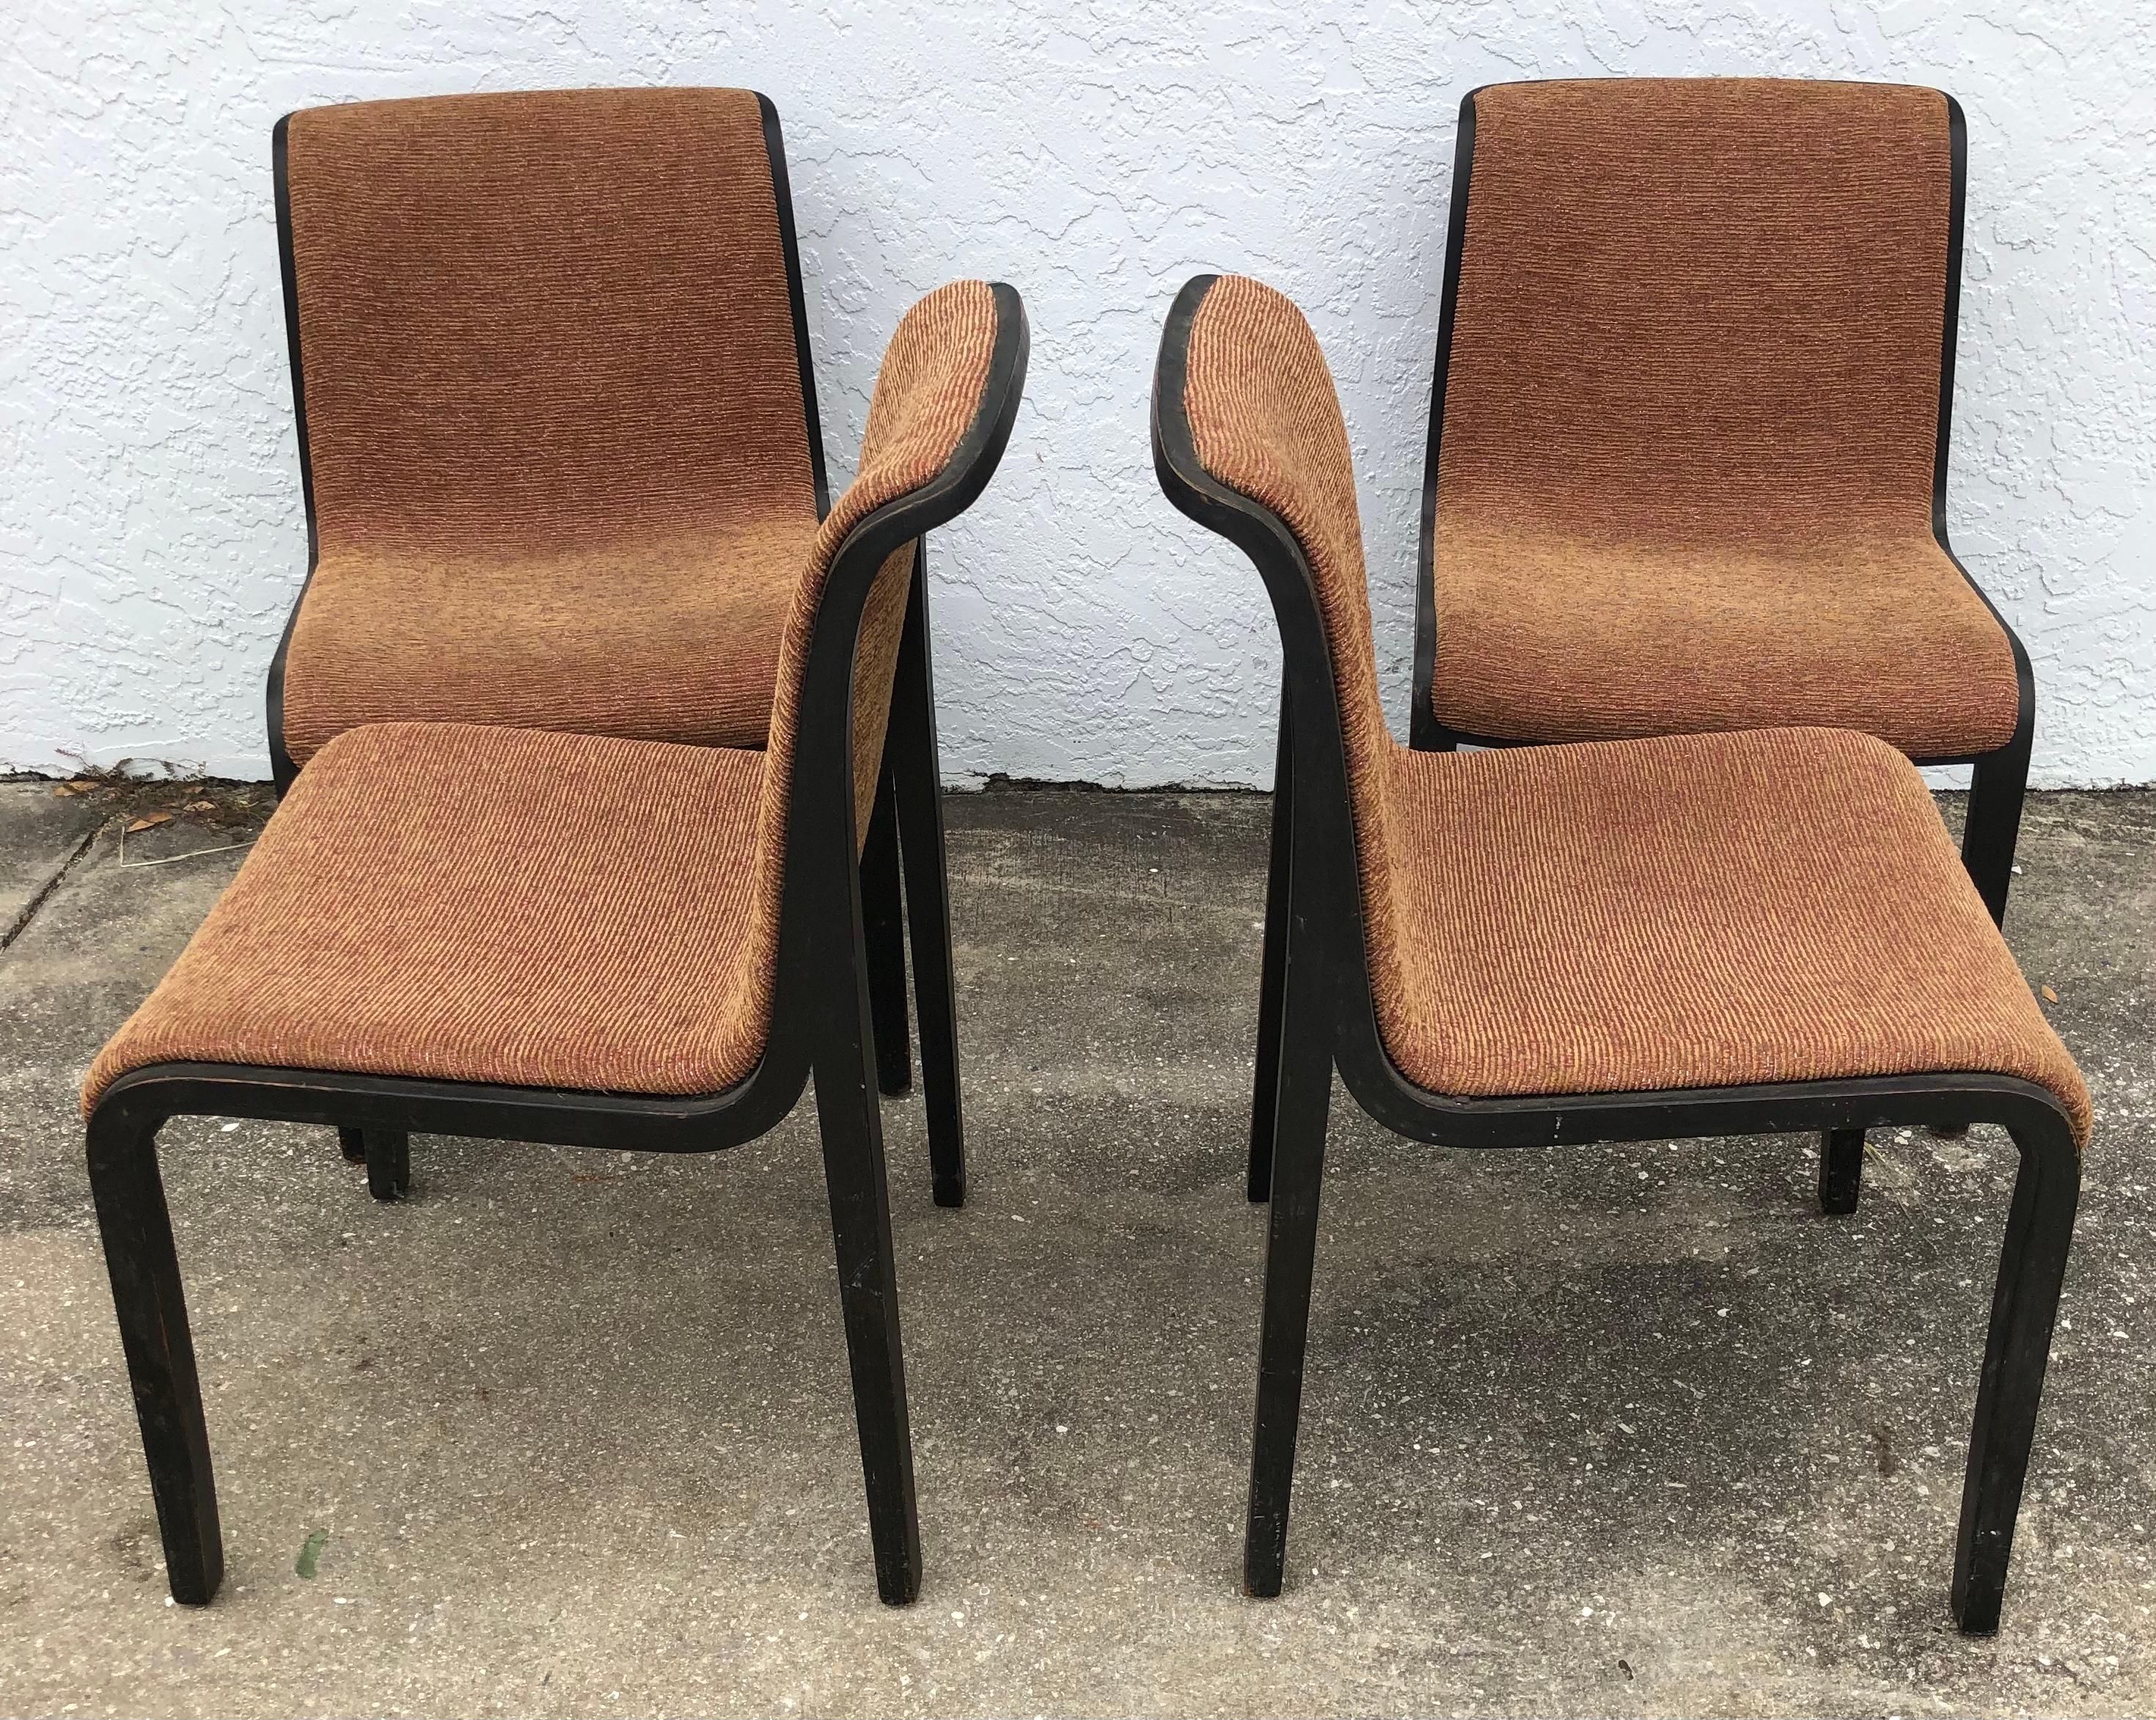 20th Century Set of 4 Mid-Century Modern Bill Stephens Knoll Black Walnut Side Chairs For Sale